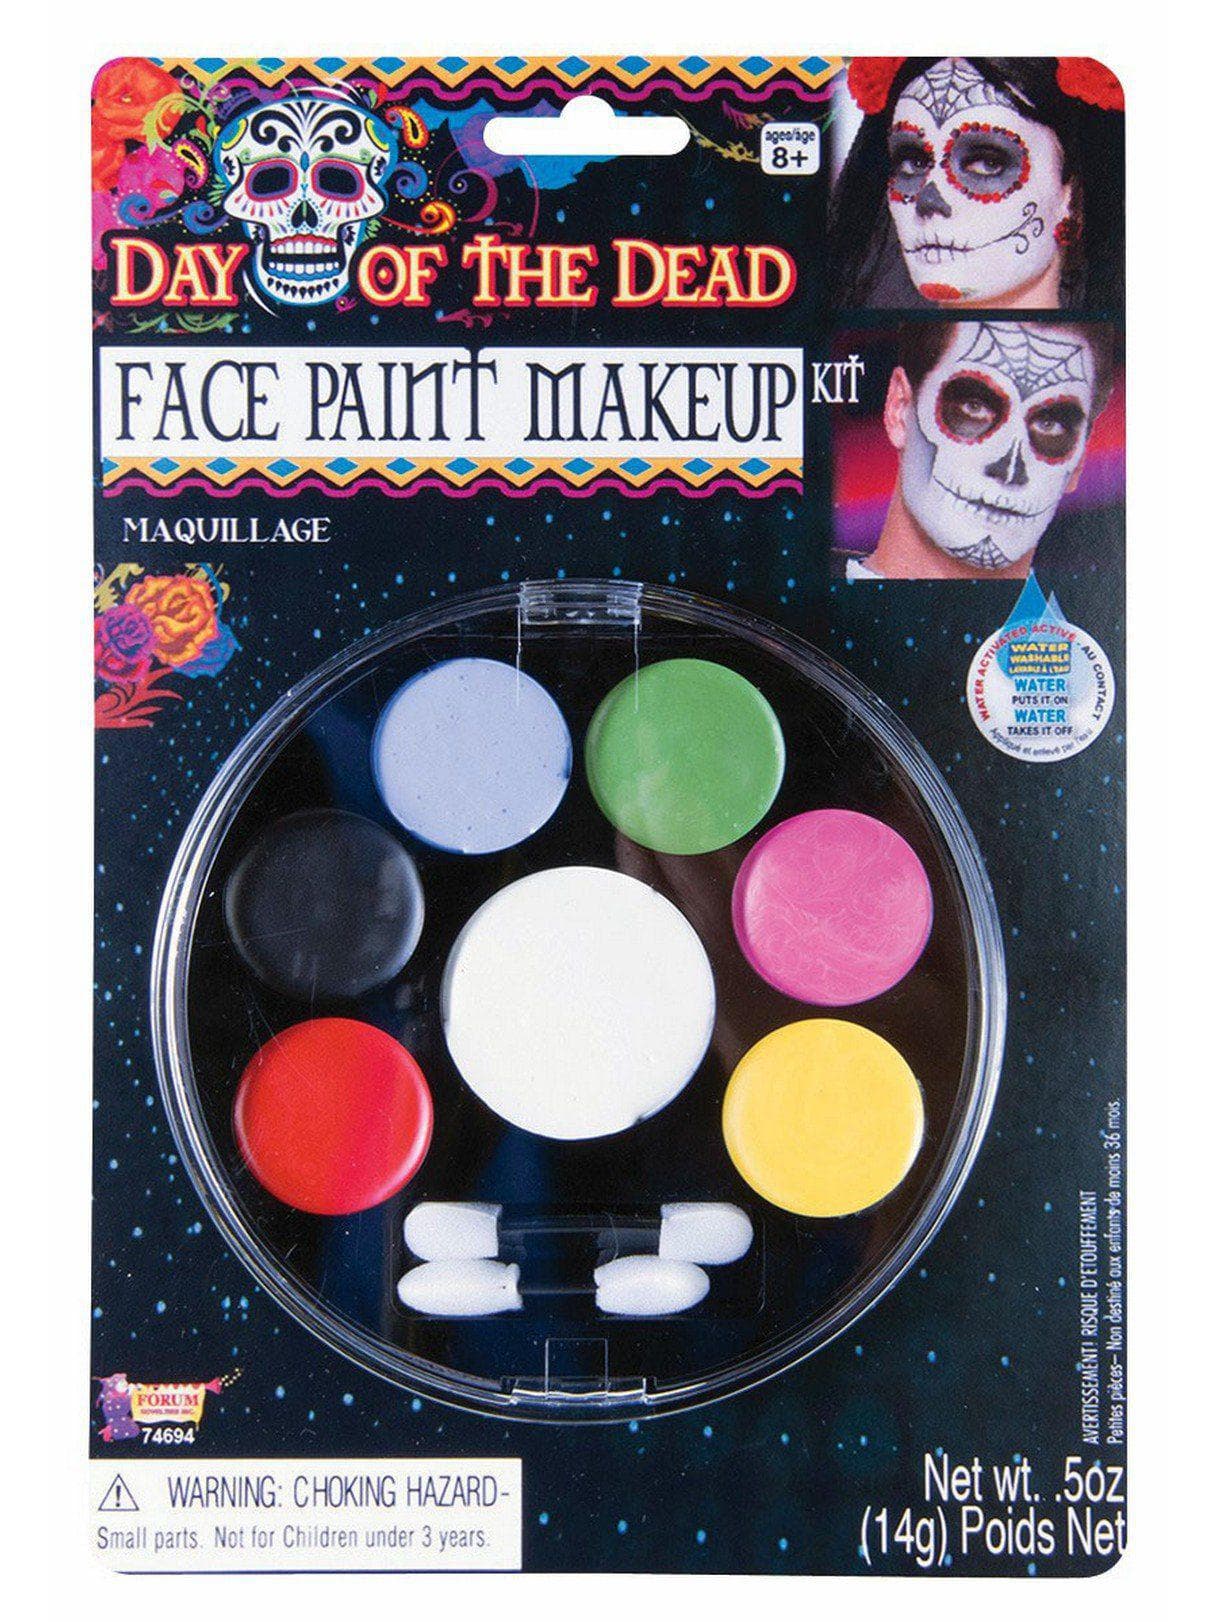 Day of the Dead Inspired Makeup Set - costumes.com